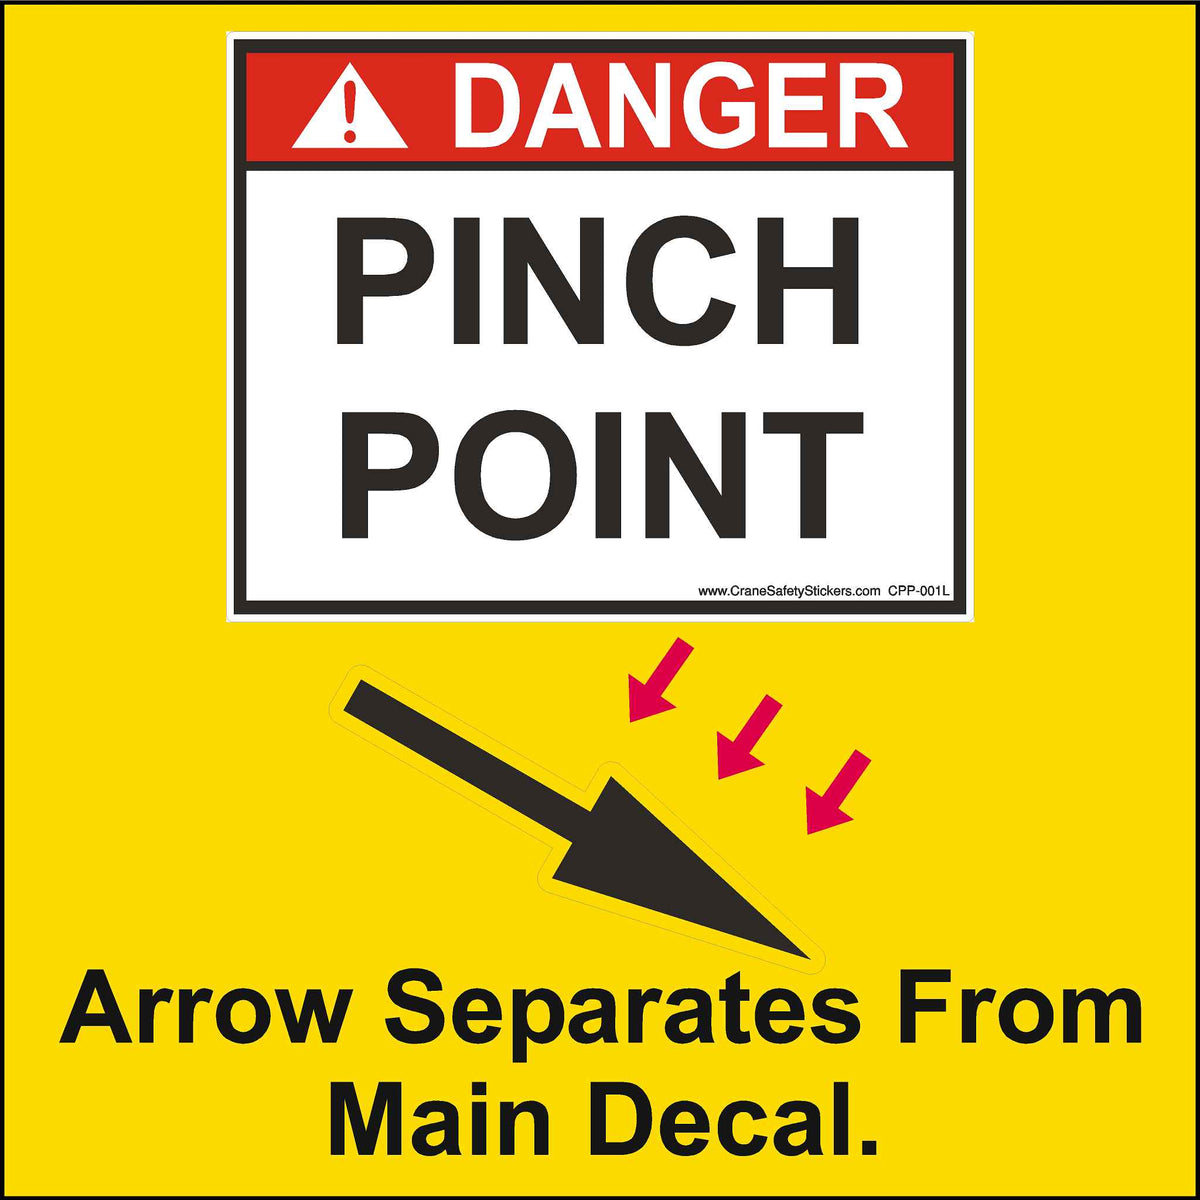 Pinch Point Decal showing the arrow detached and pointing in a different direction.